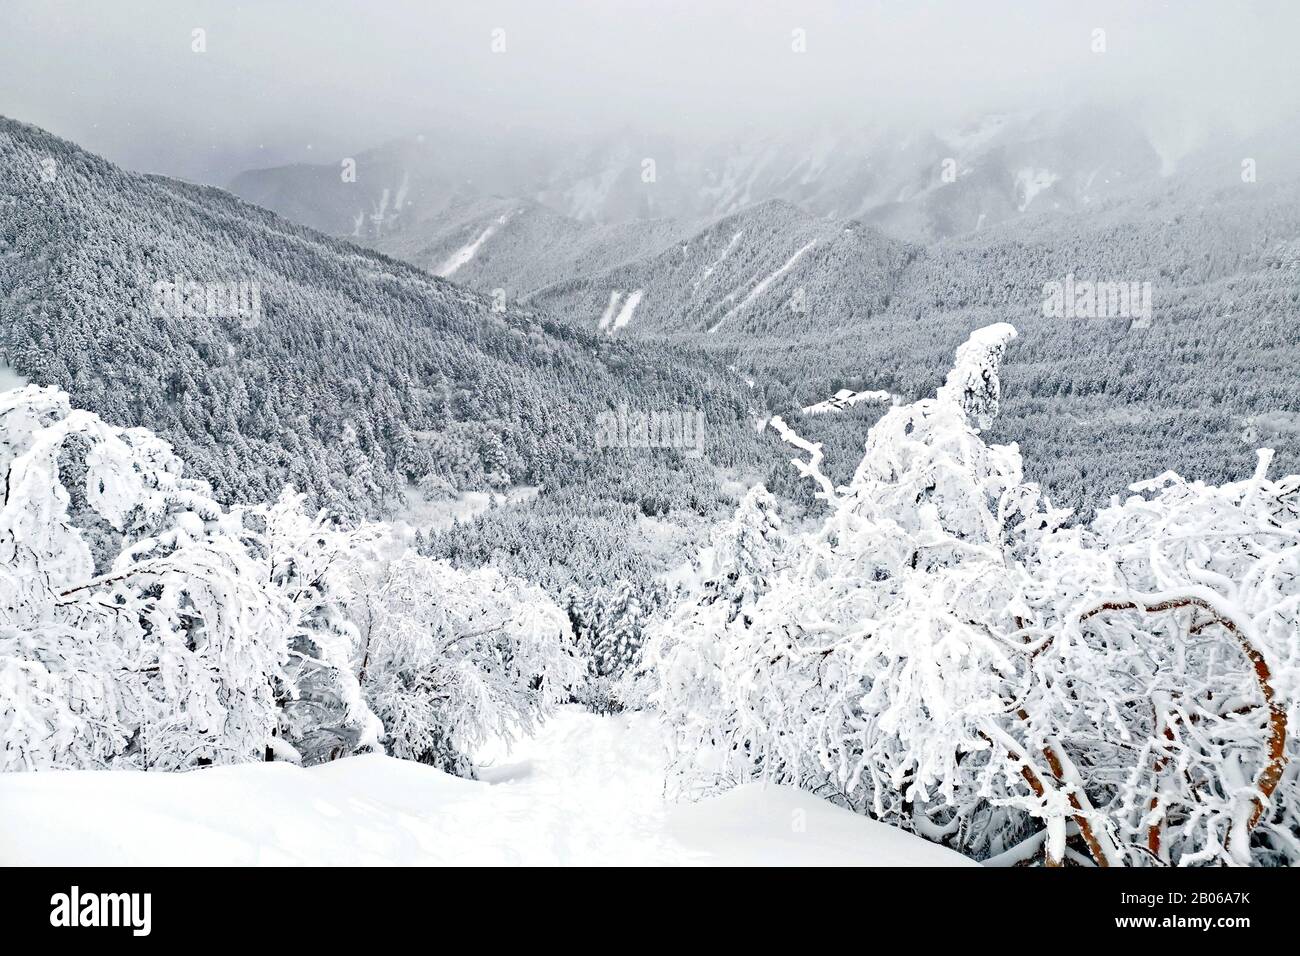 The natural snow hill and tree in Japan Yatsugatake mountains Stock Photo